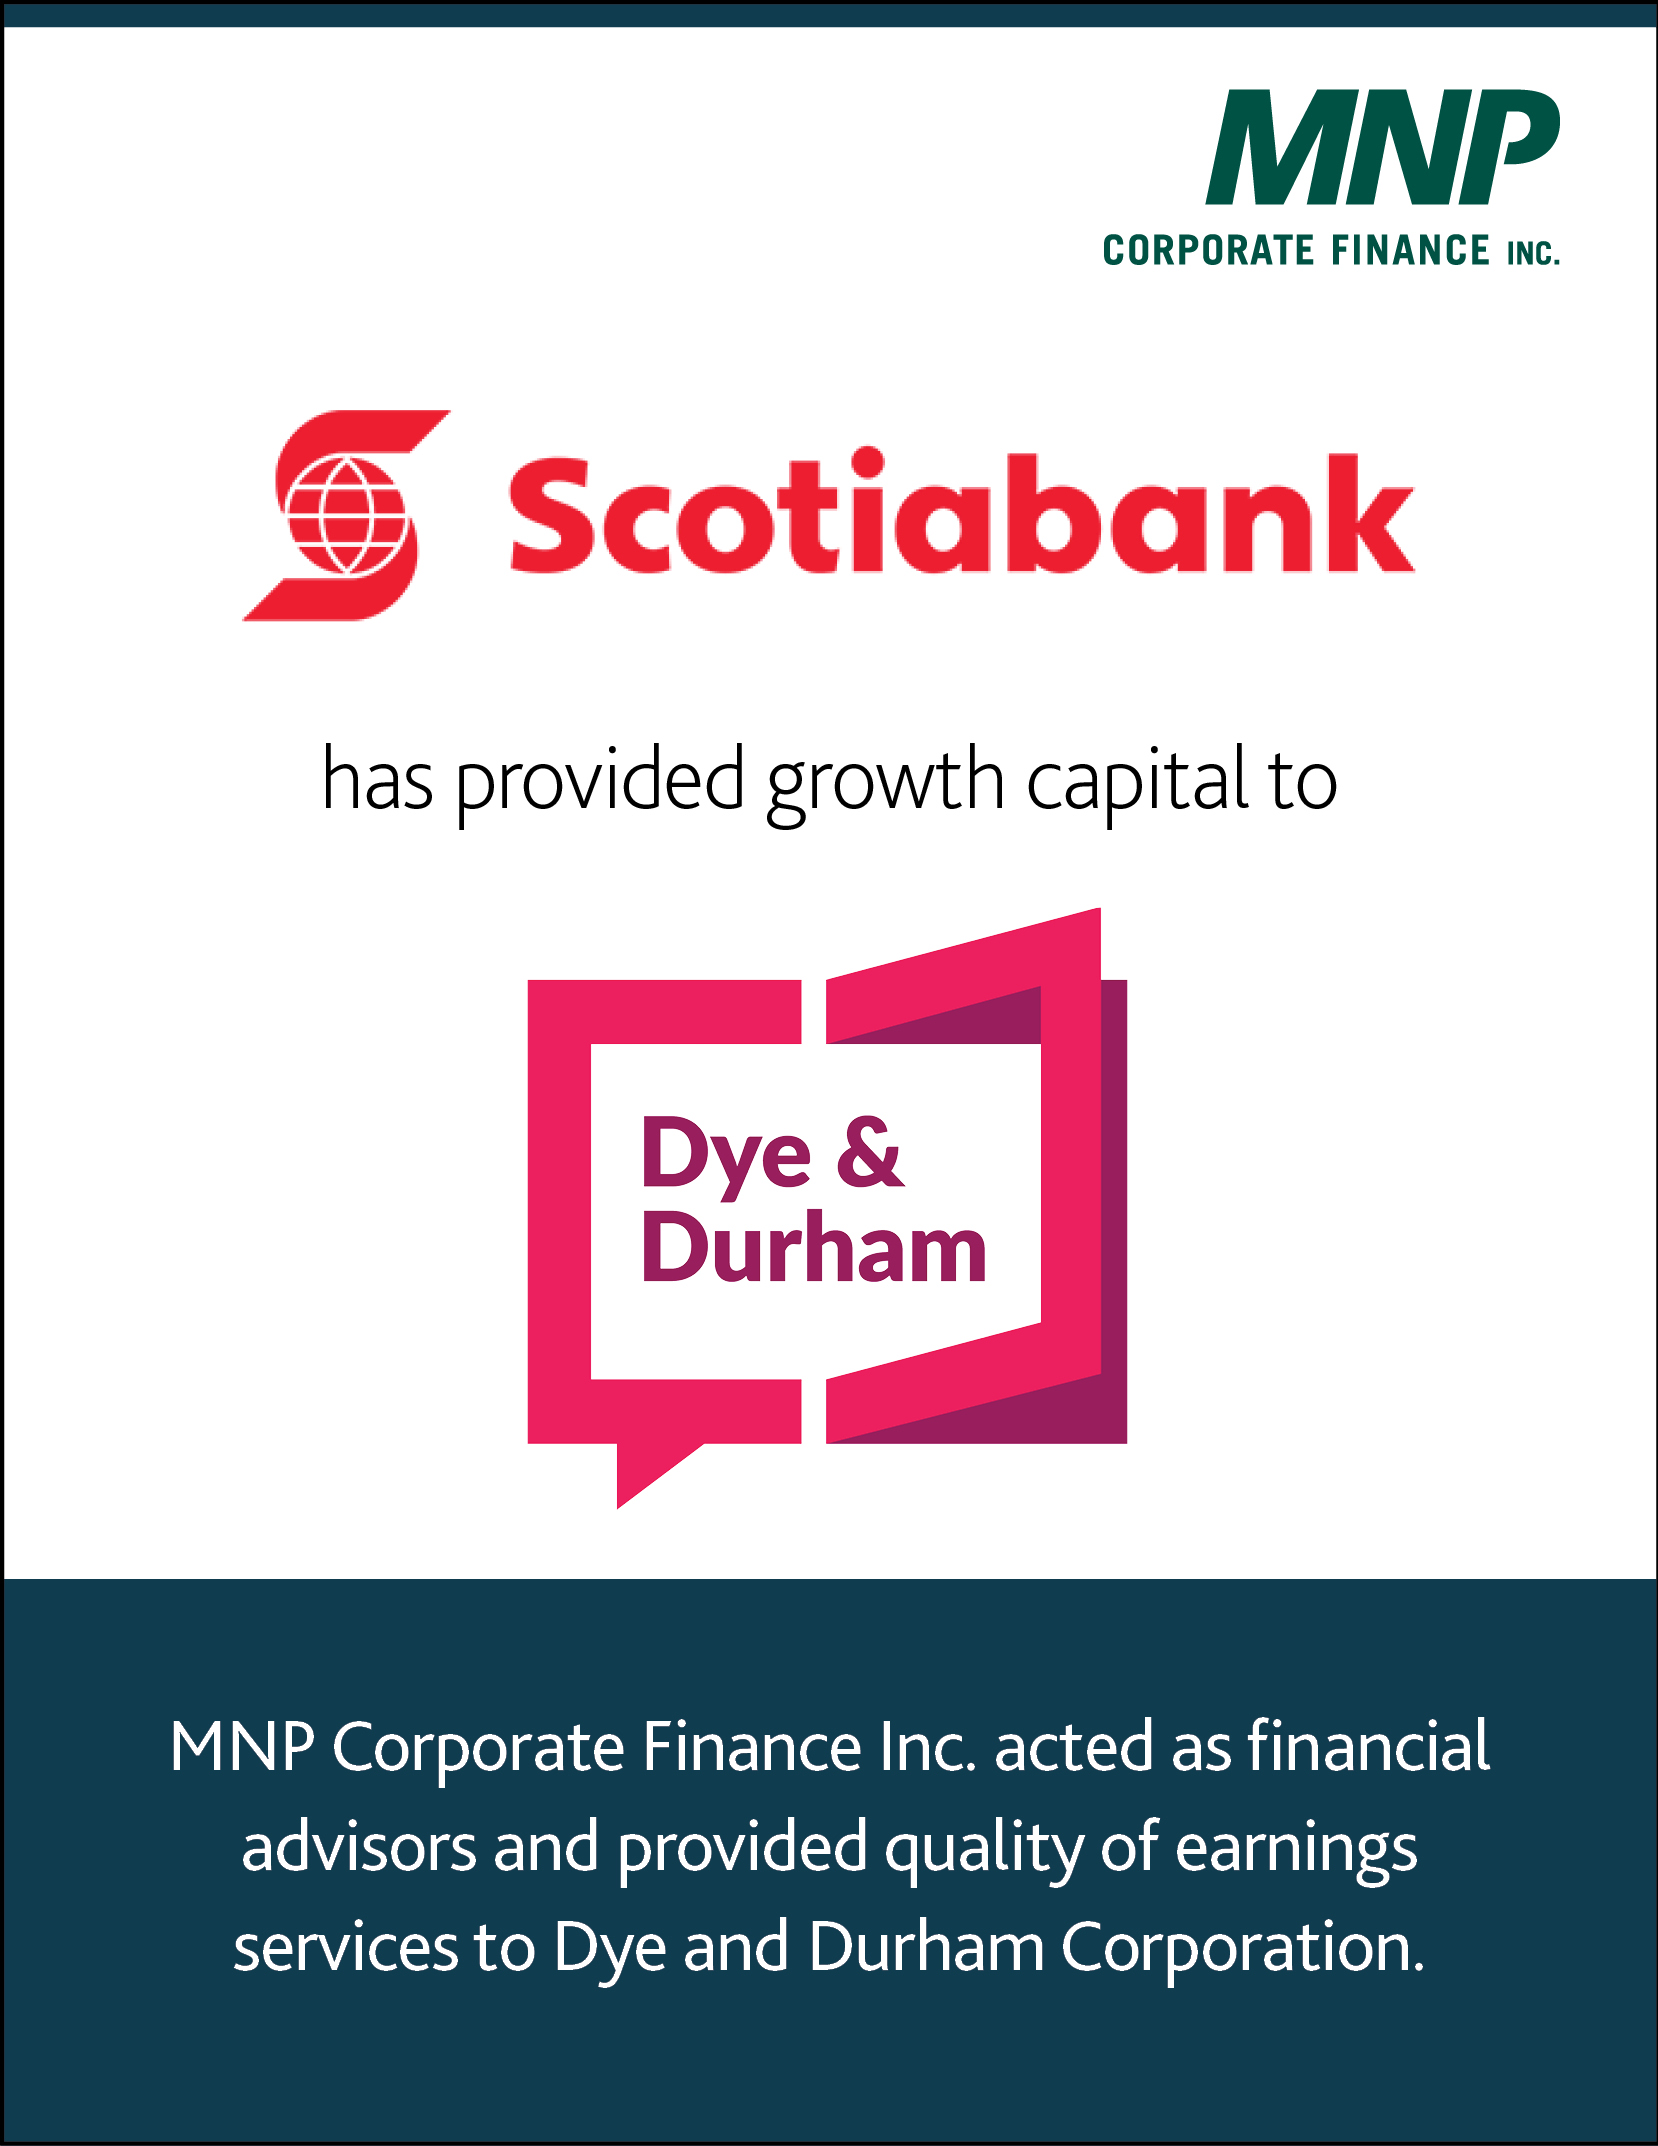 Scotiabank has provided growth capital to Dye & Durham